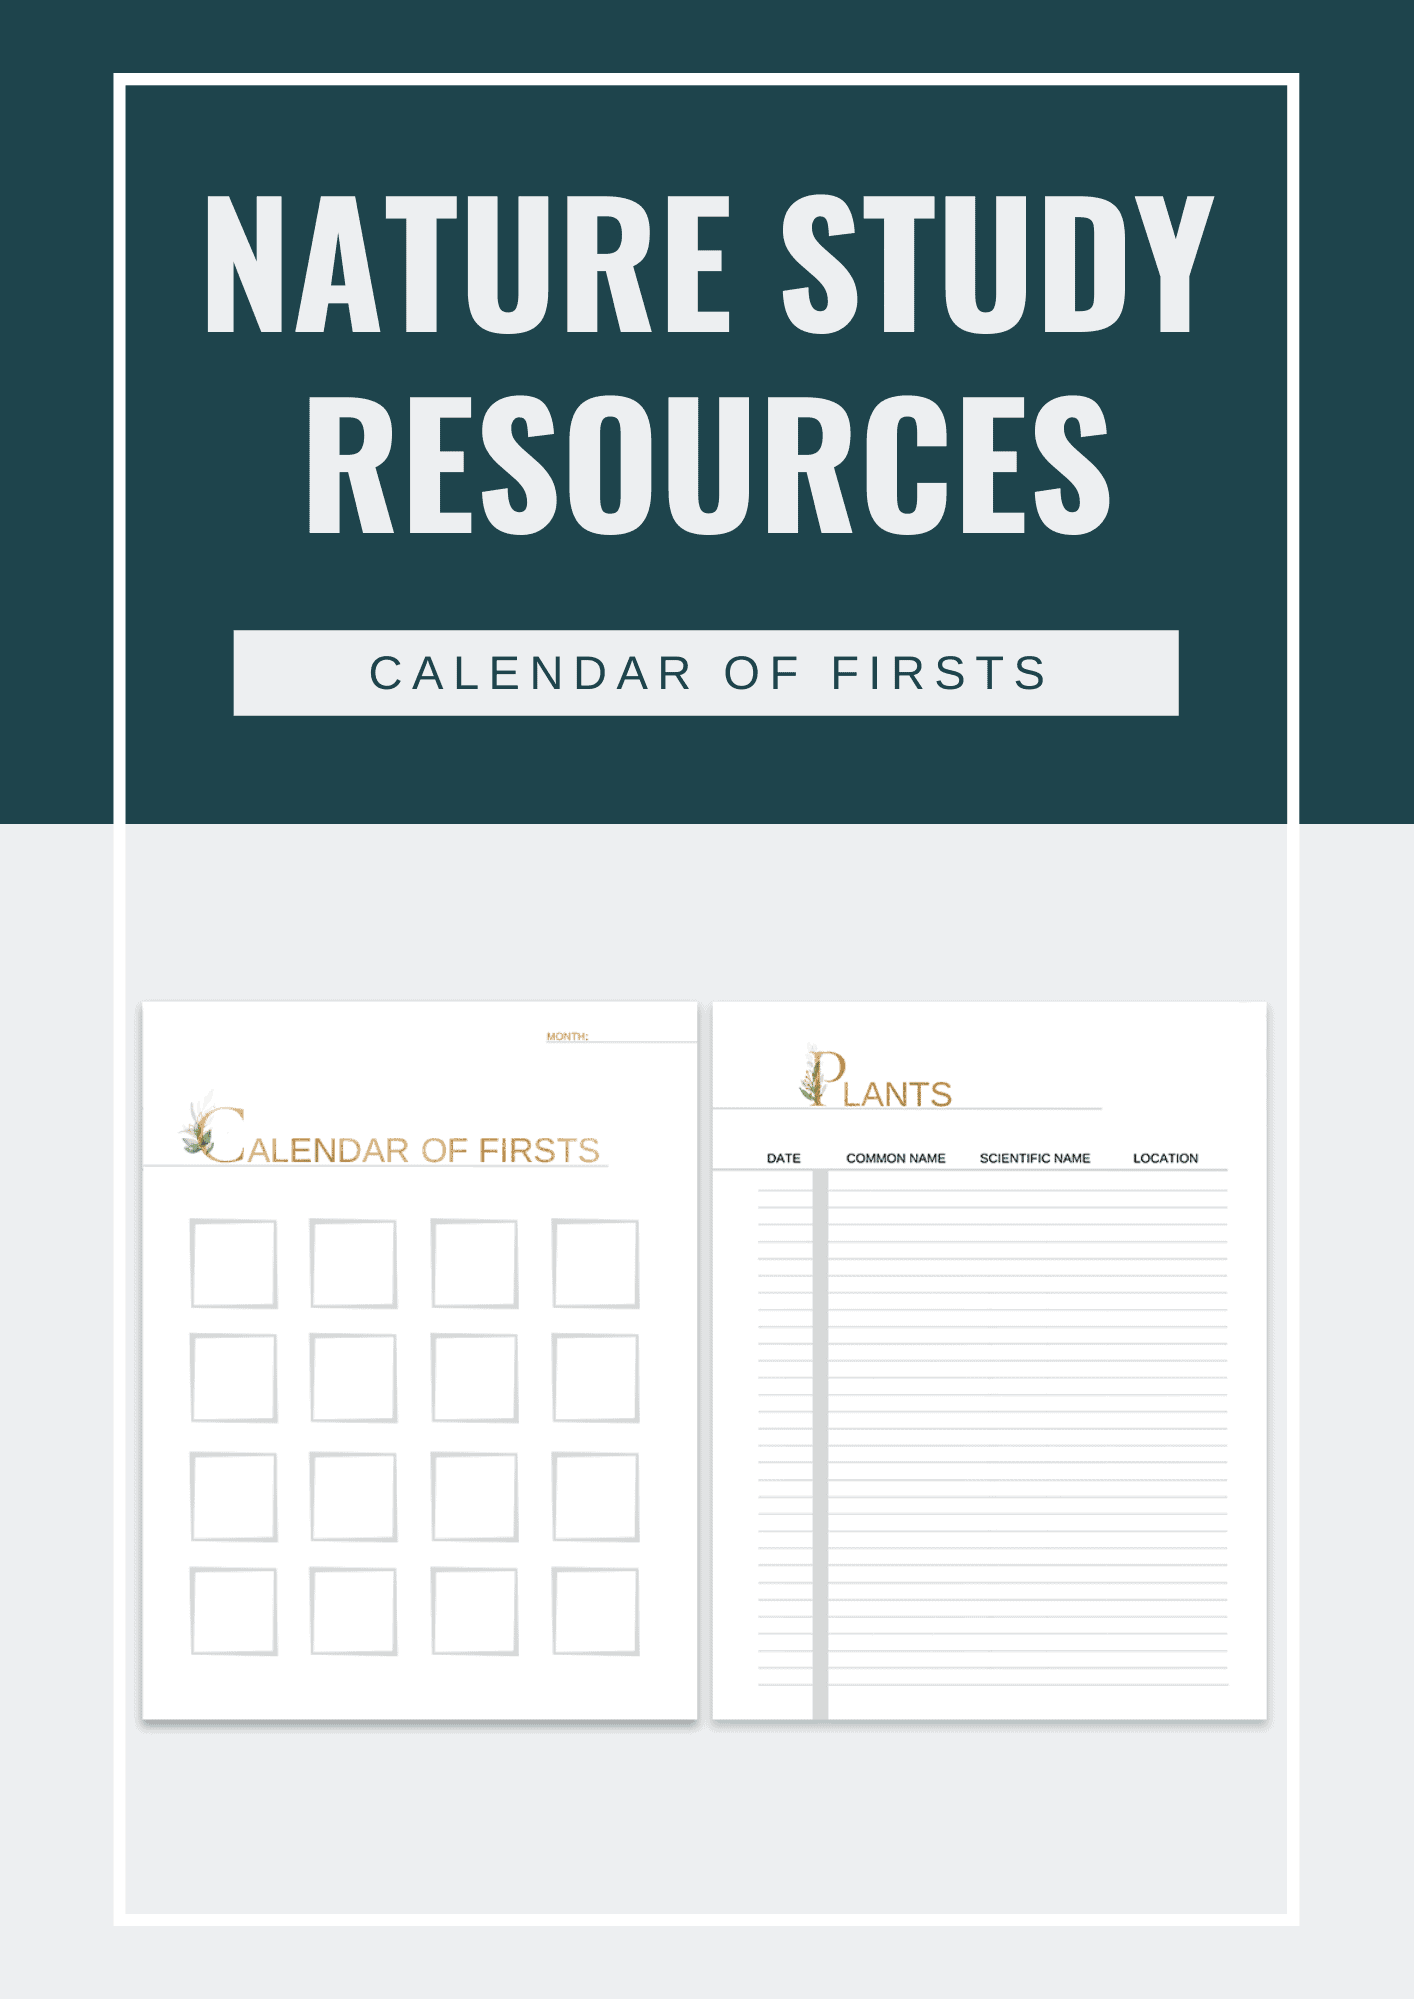 Homeschool planning and recordkeeping doesn’t have to be nearly as complicated or as stressful as it may seem — even if you’re new to this whole organization thing. There's an easier way to plan your days. Our printable homeschool bullet journal is a low-pressure, flexible planning system that encourages you to set weekly goals and prioritize the things that matter most. Head to www.freeandunfettered.com to start getting organized now. 
